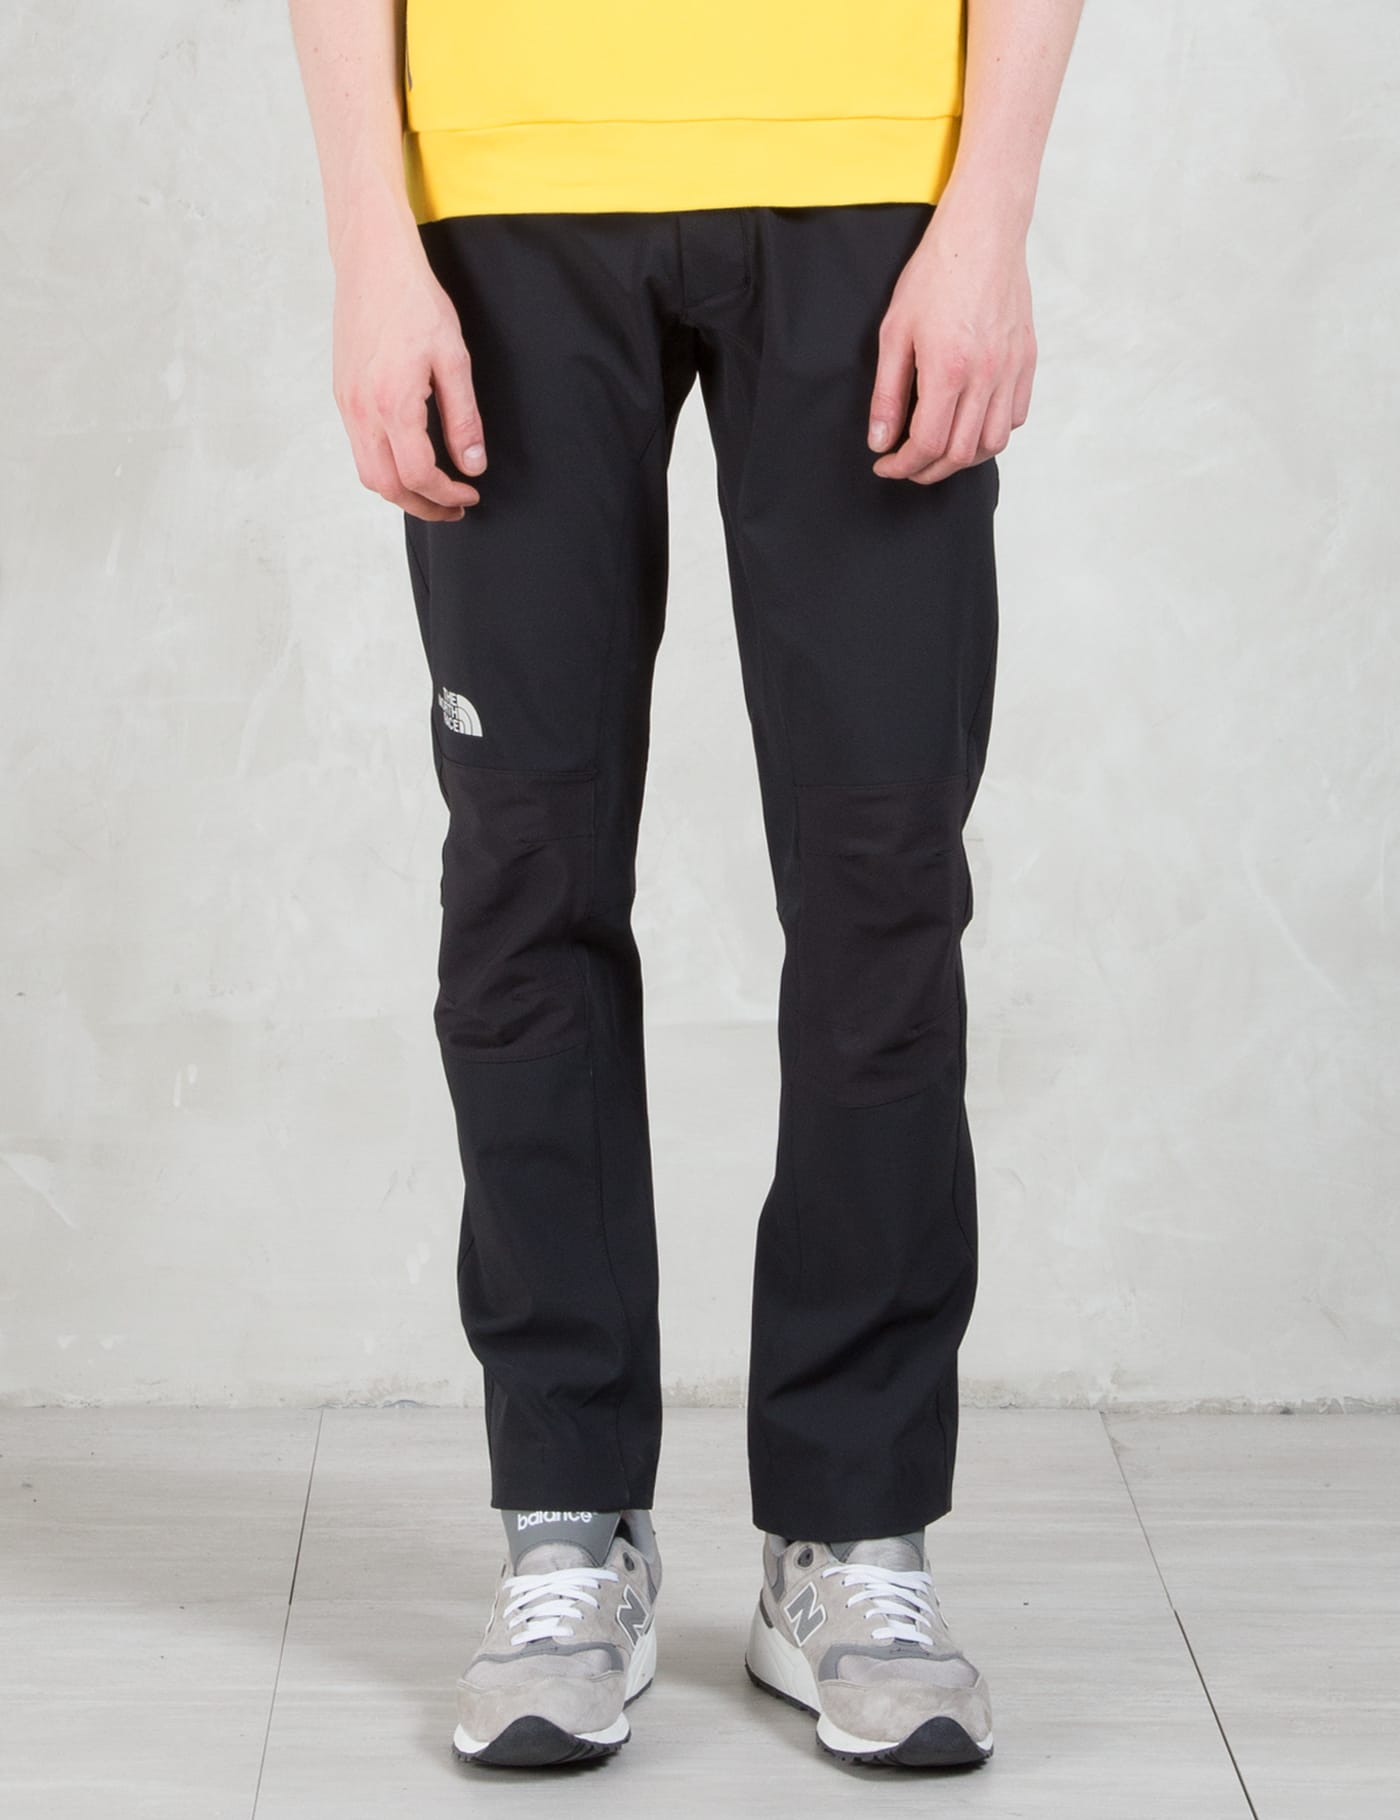 north face climbing trousers